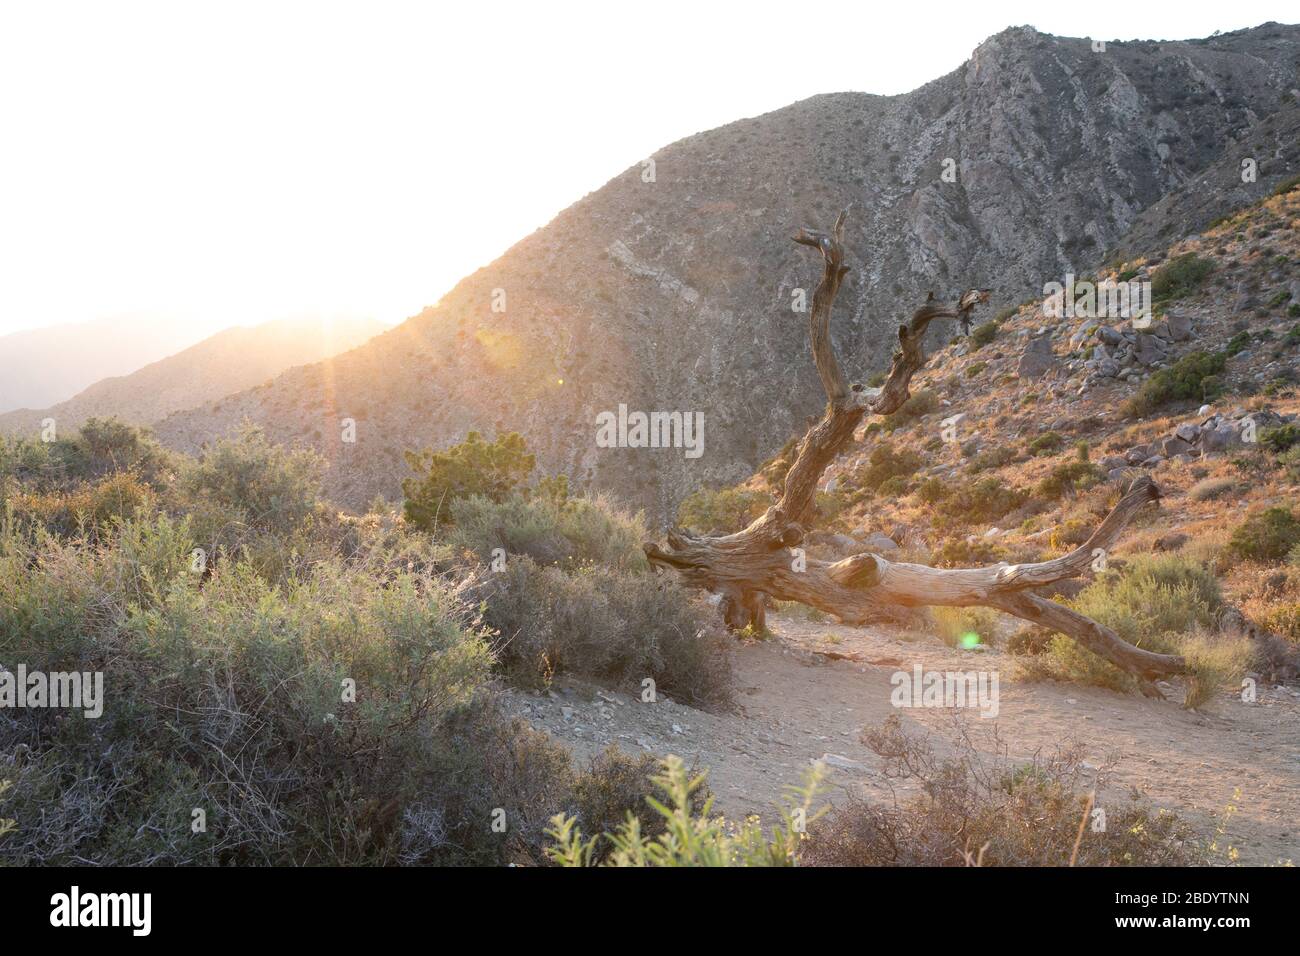 the sun pops behind the crest of a mountain creating a sunburst over a dead tree in the desert Stock Photo